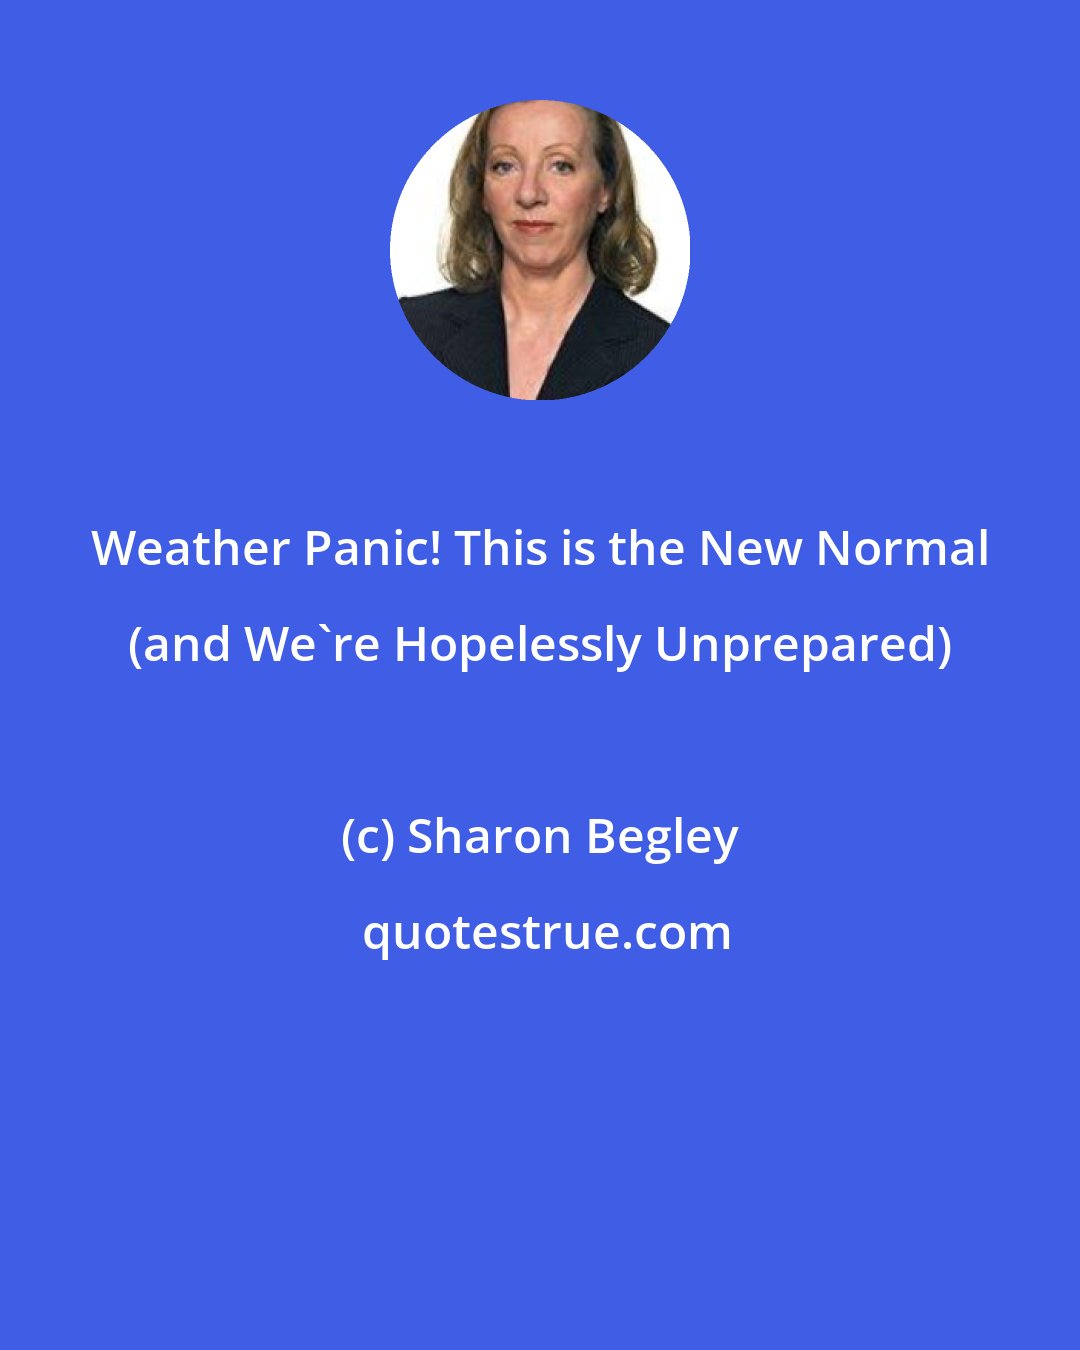 Sharon Begley: Weather Panic! This is the New Normal (and We're Hopelessly Unprepared)